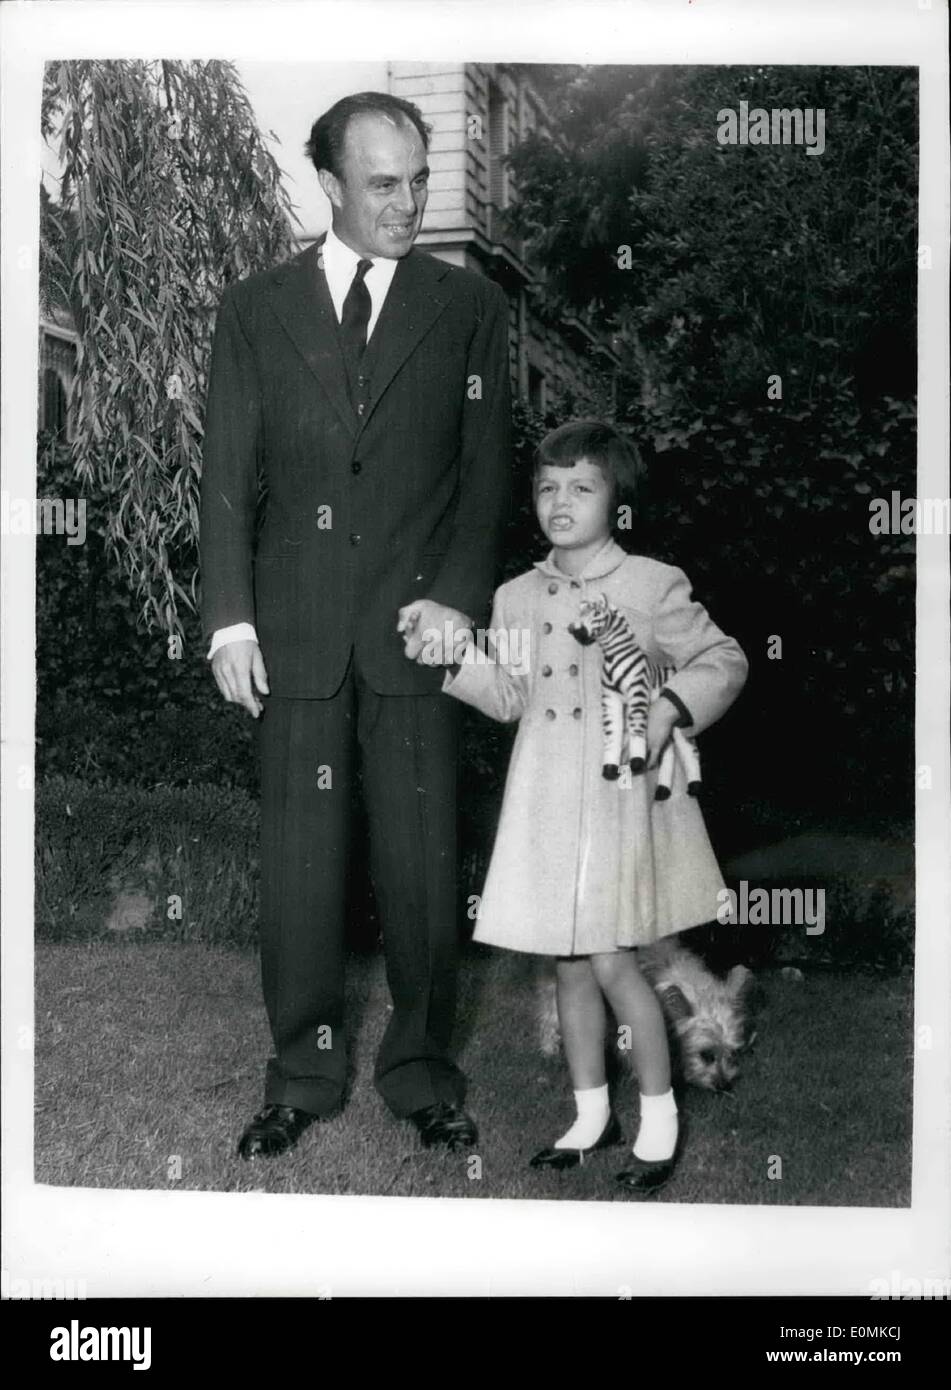 Oct. 10, 1955 - Prince Aly Khan and daughter Yasmin. Photo shows Prince Aly Khan pictured with his little daughter Yasmin, in the garden of his house in Neuilly, Paris, yesterday. Stock Photo